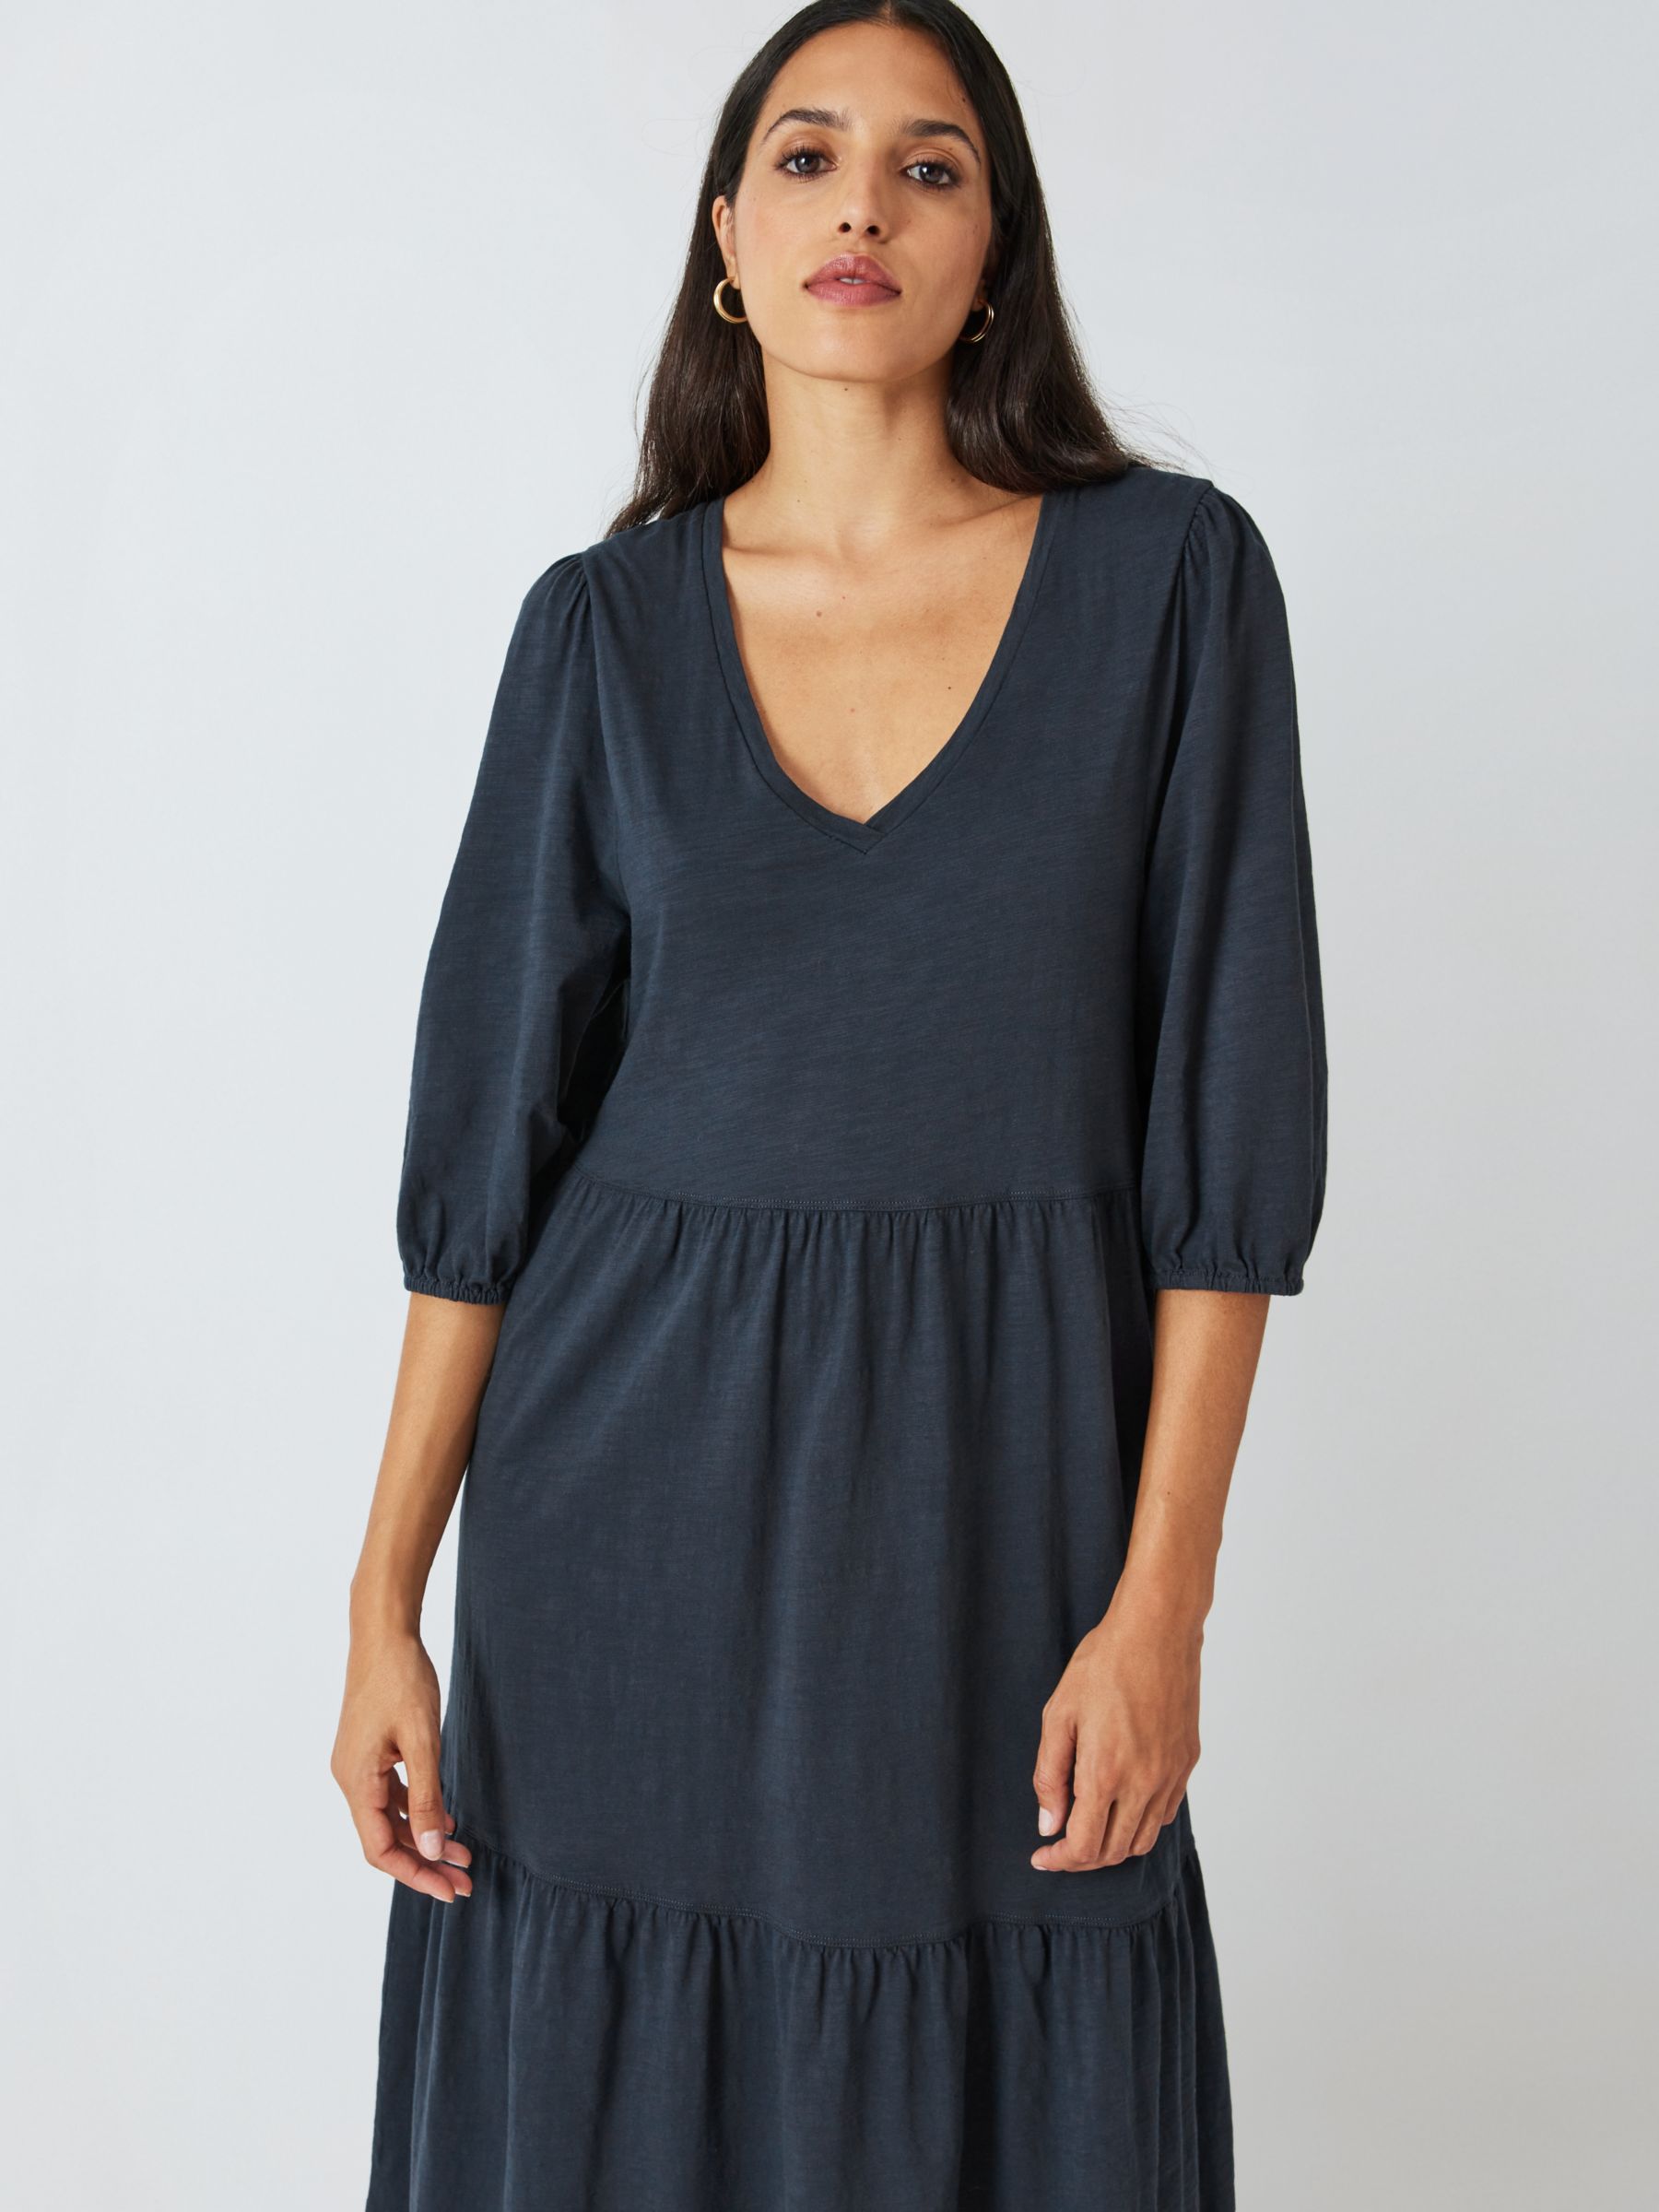 AND/OR Ellerie Plain Tiered Midi Dress, Navy